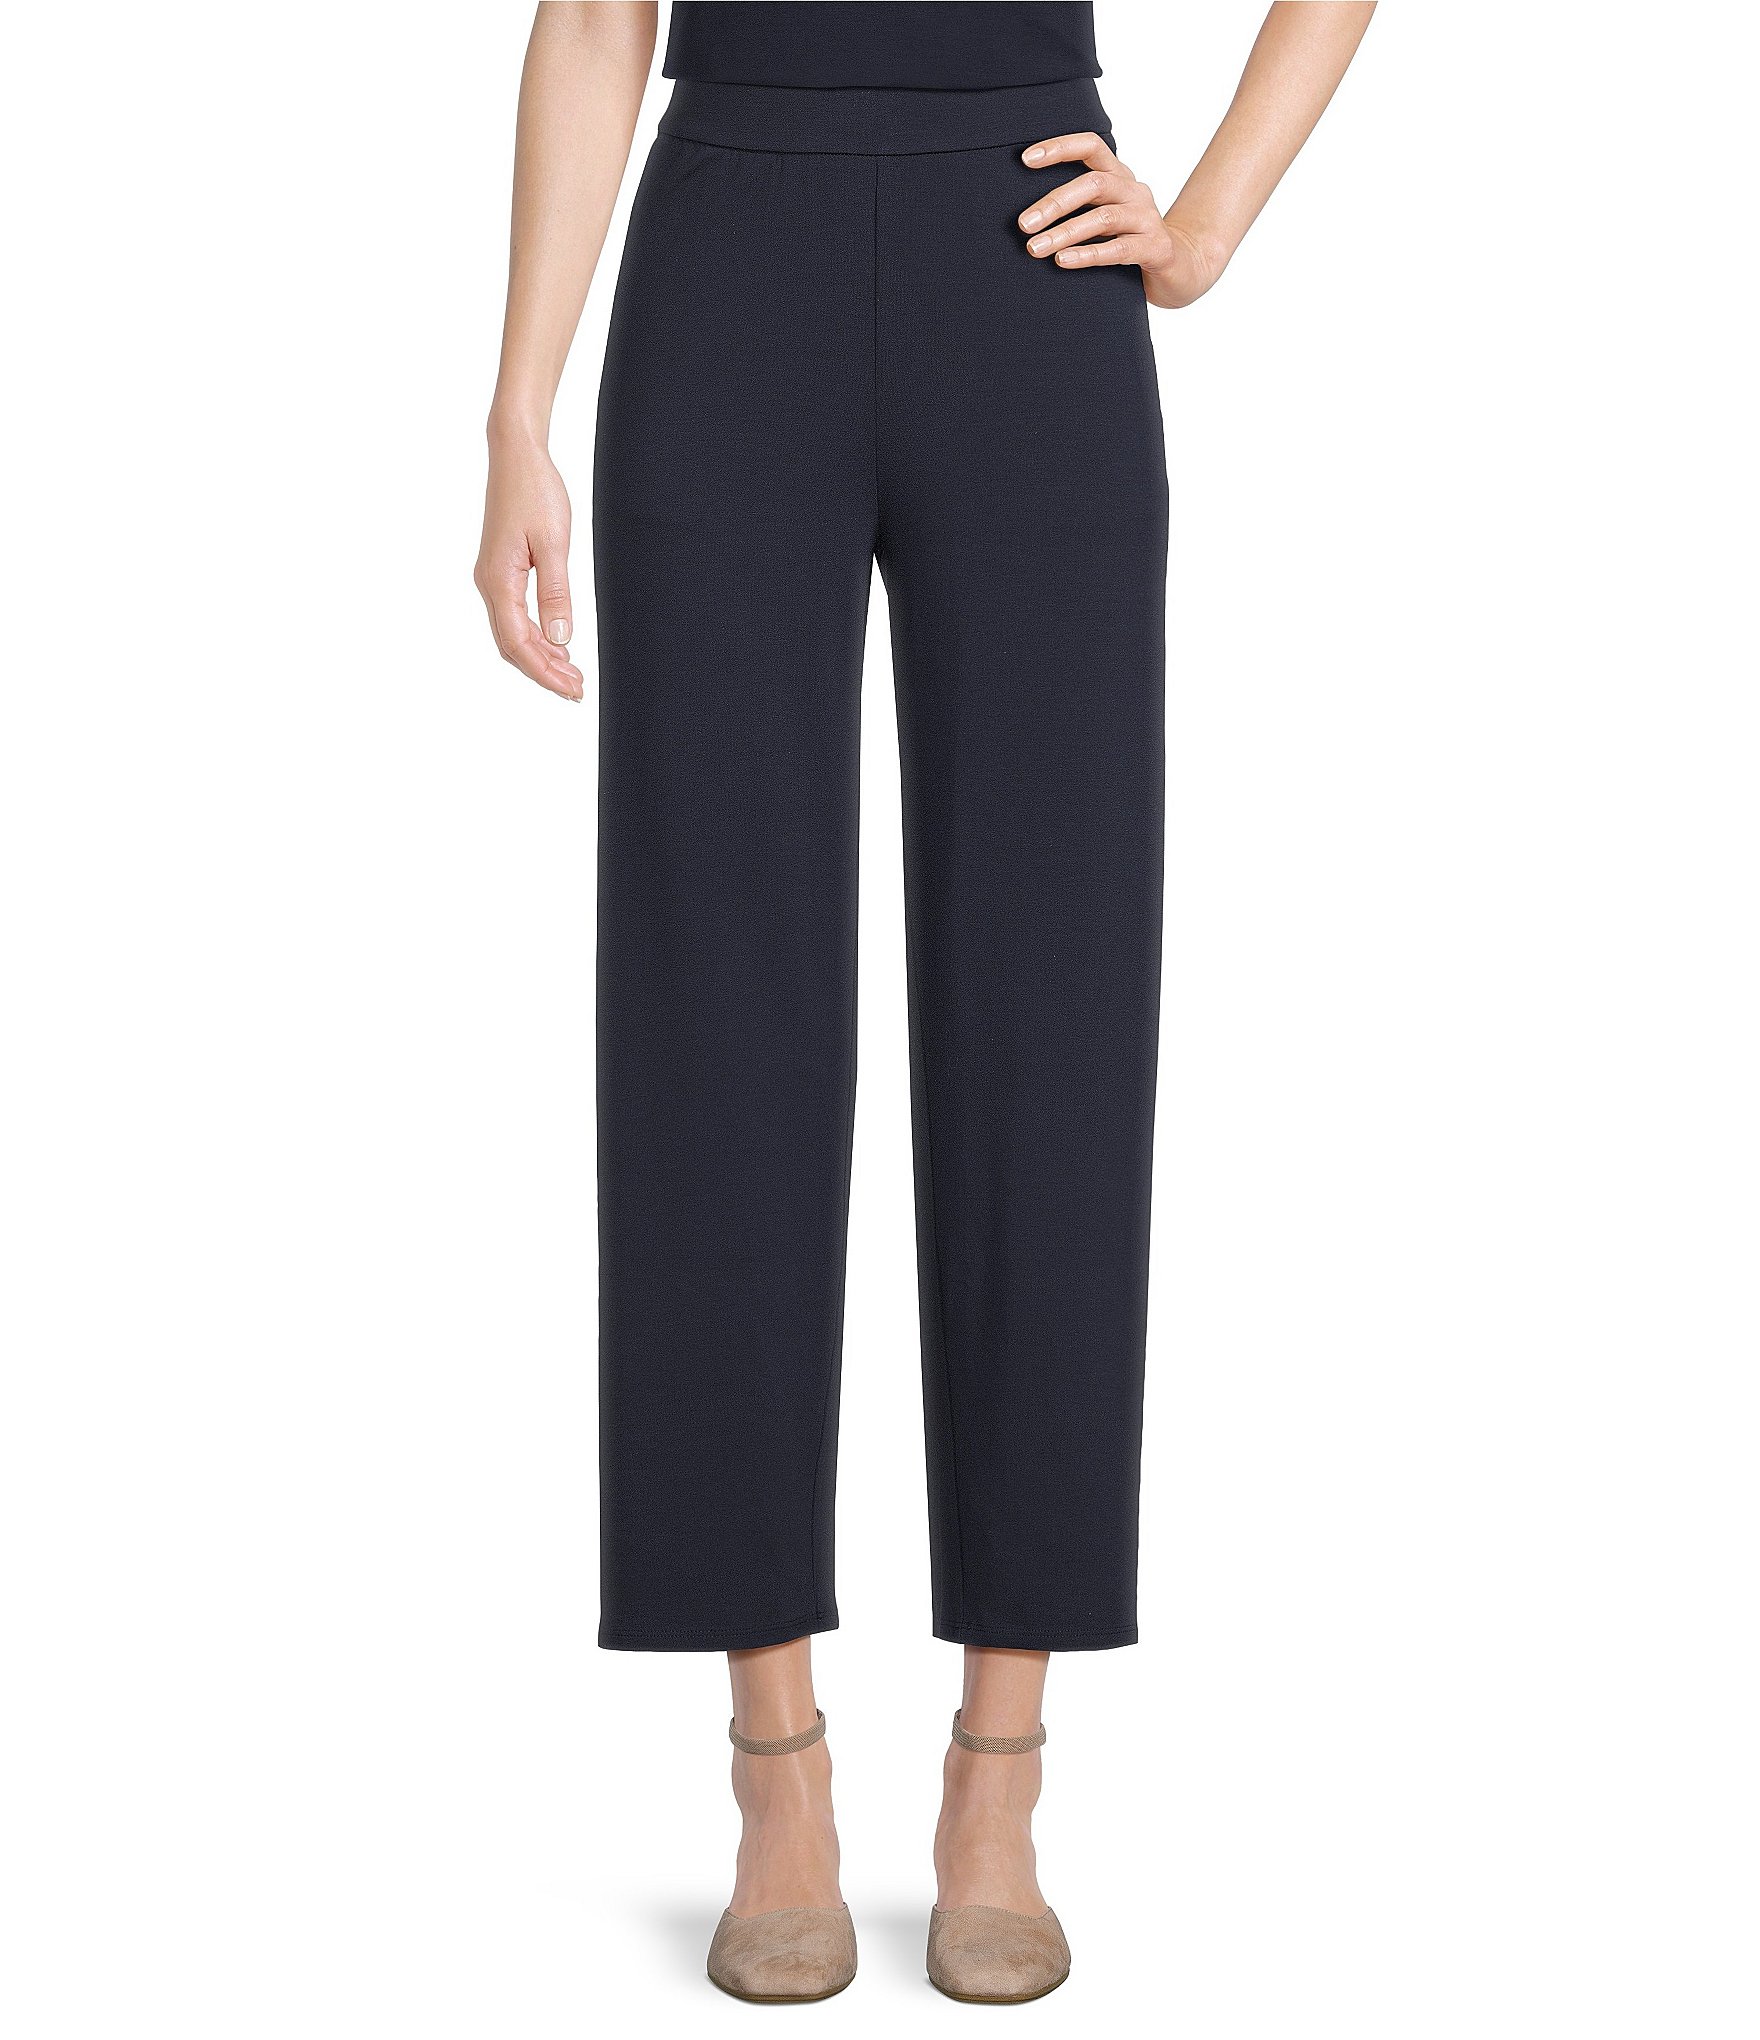 https://dimg.dillards.com/is/image/DillardsZoom/zoom/eileen-fisher-stretch-jersey-knit-straight-wide-leg-pocketed-pull-on-ankle-pant/00000000_zi_14b2d91f-705e-4216-874d-b4cef2f7ce5a.jpg